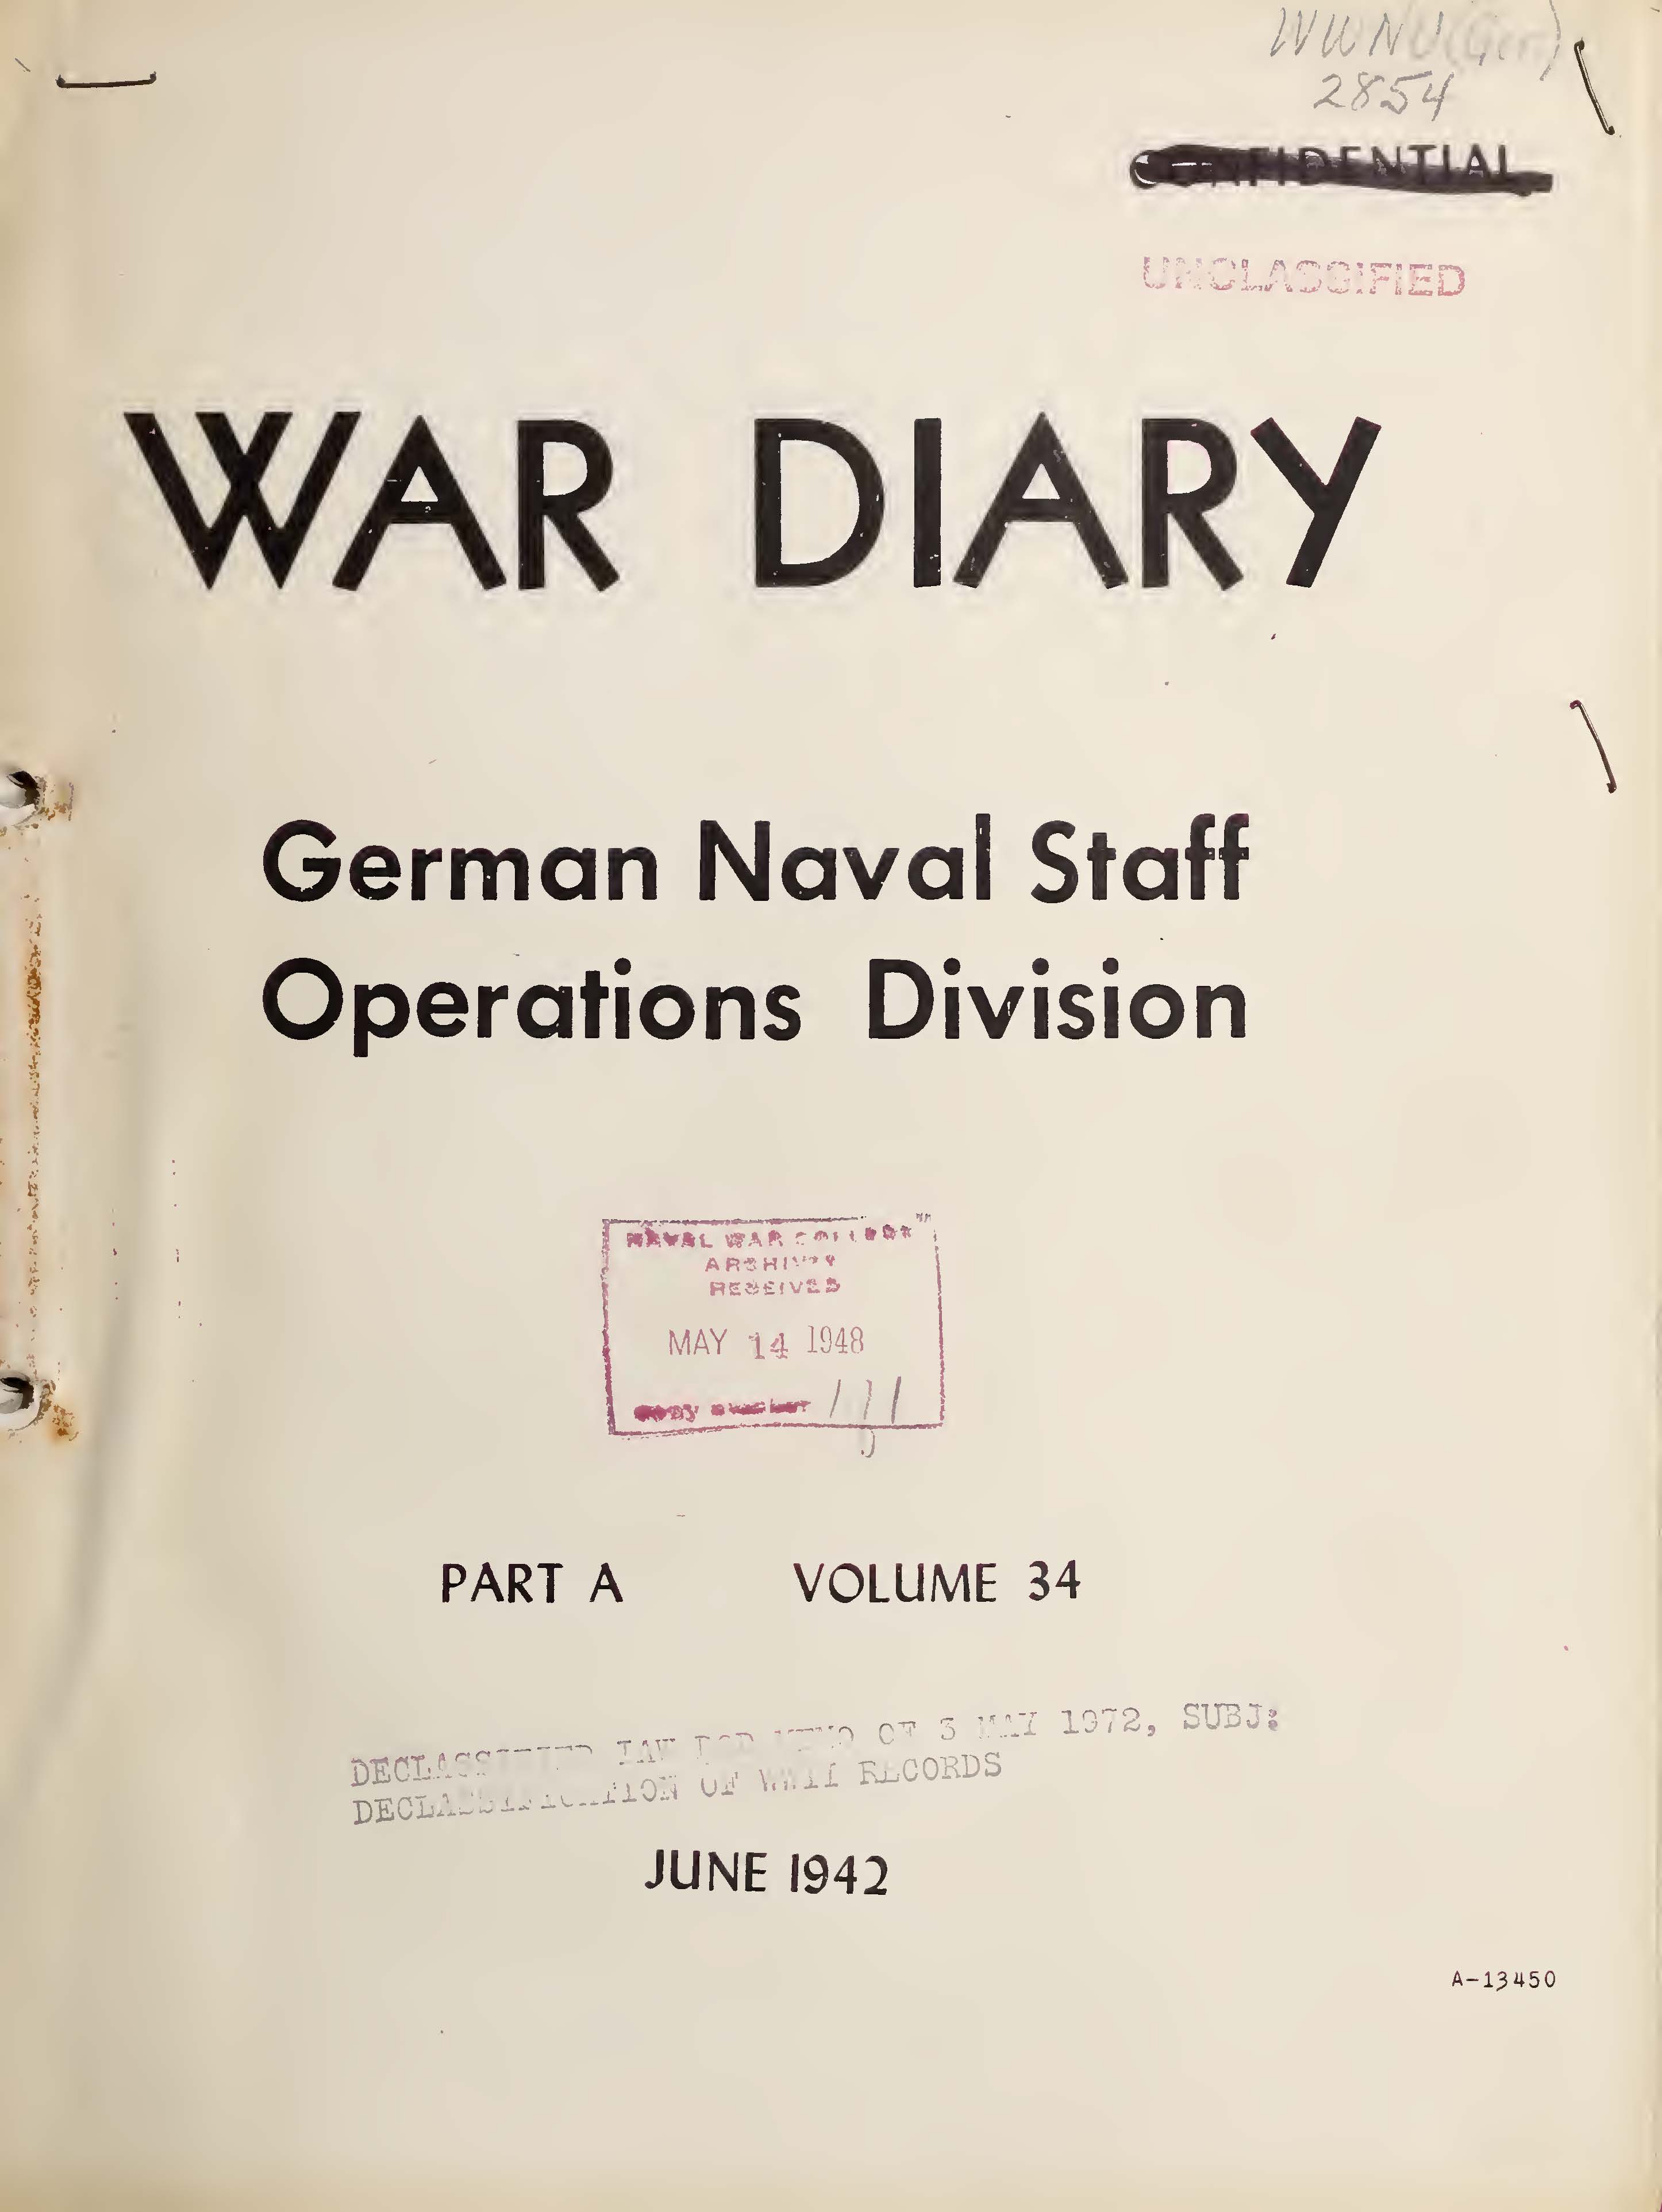 War Diary of German Naval Staff (Operations Division) Part A, Volume 34, June 1942